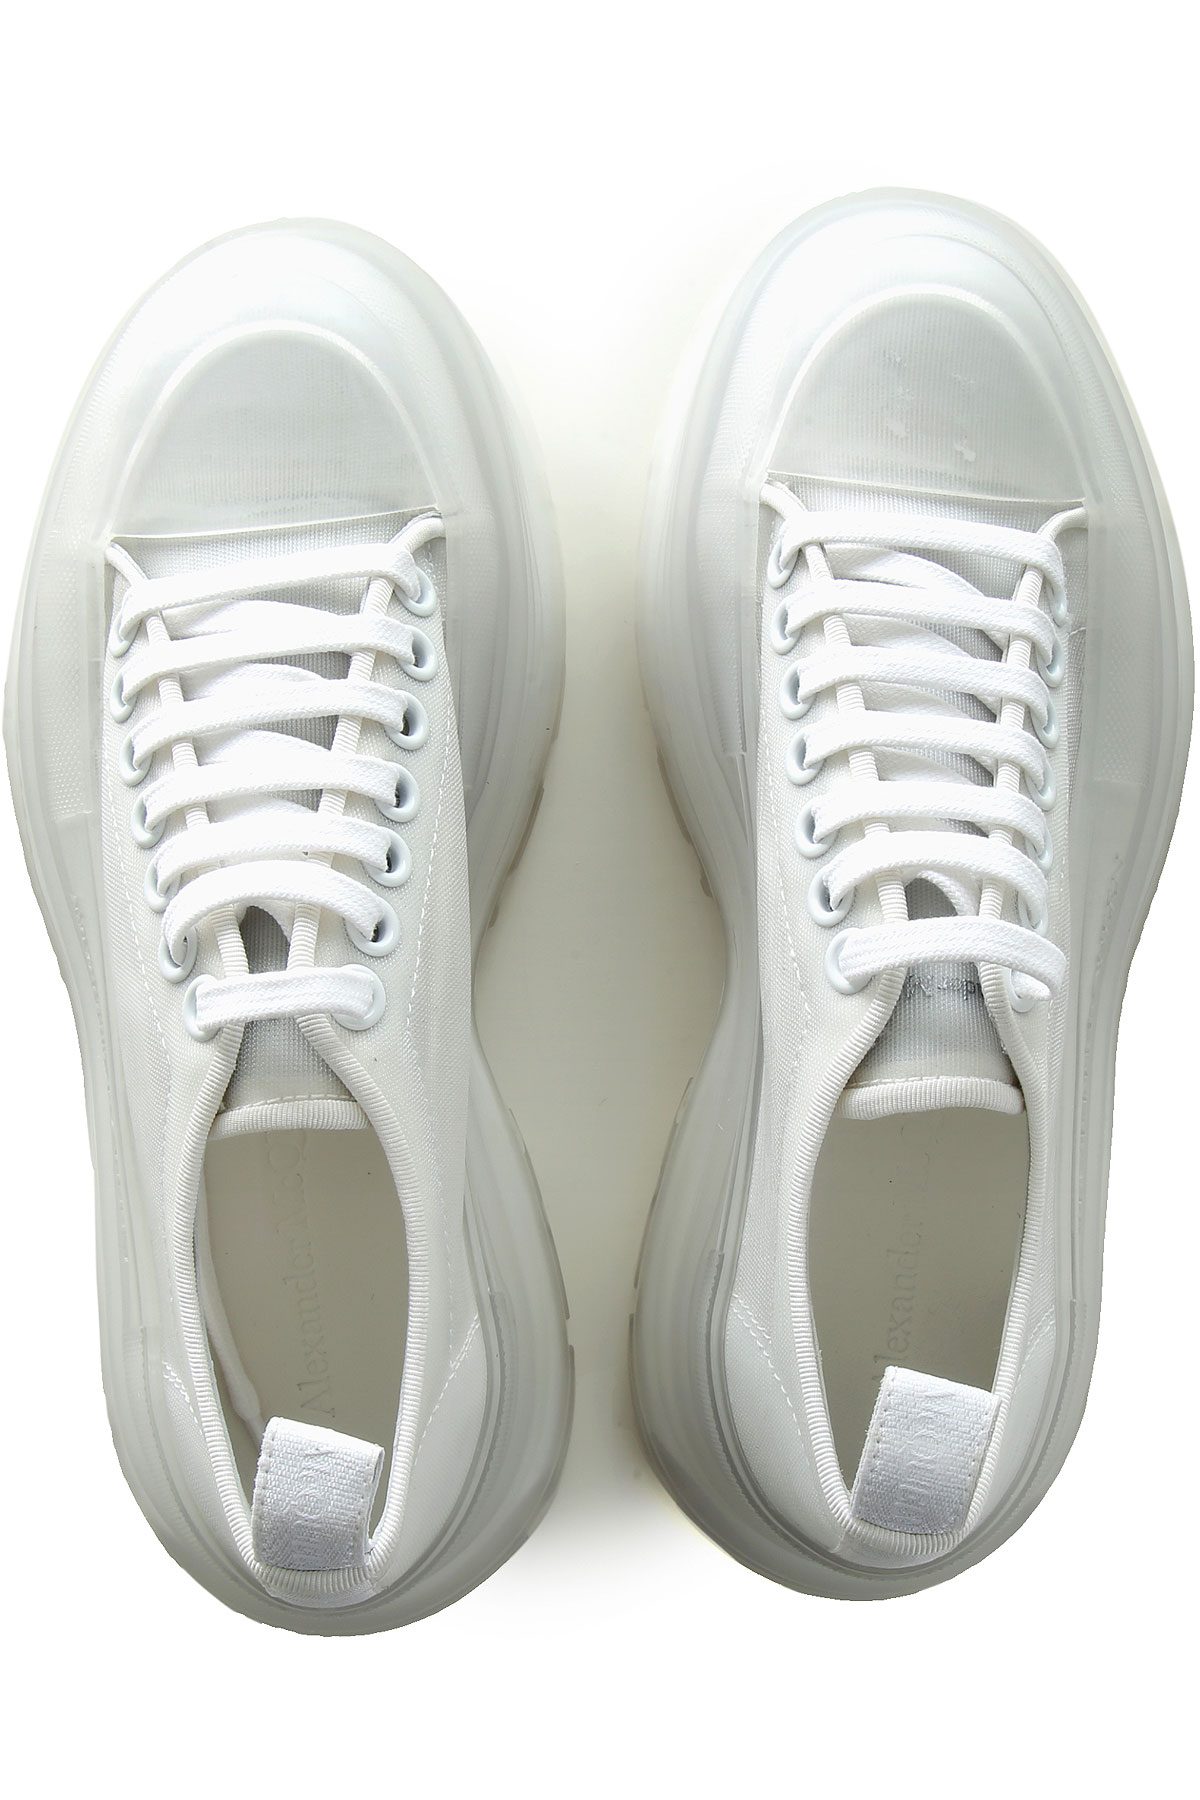 Mens Shoes Alexander McQueen, Style code: 662672-w4q31-9465